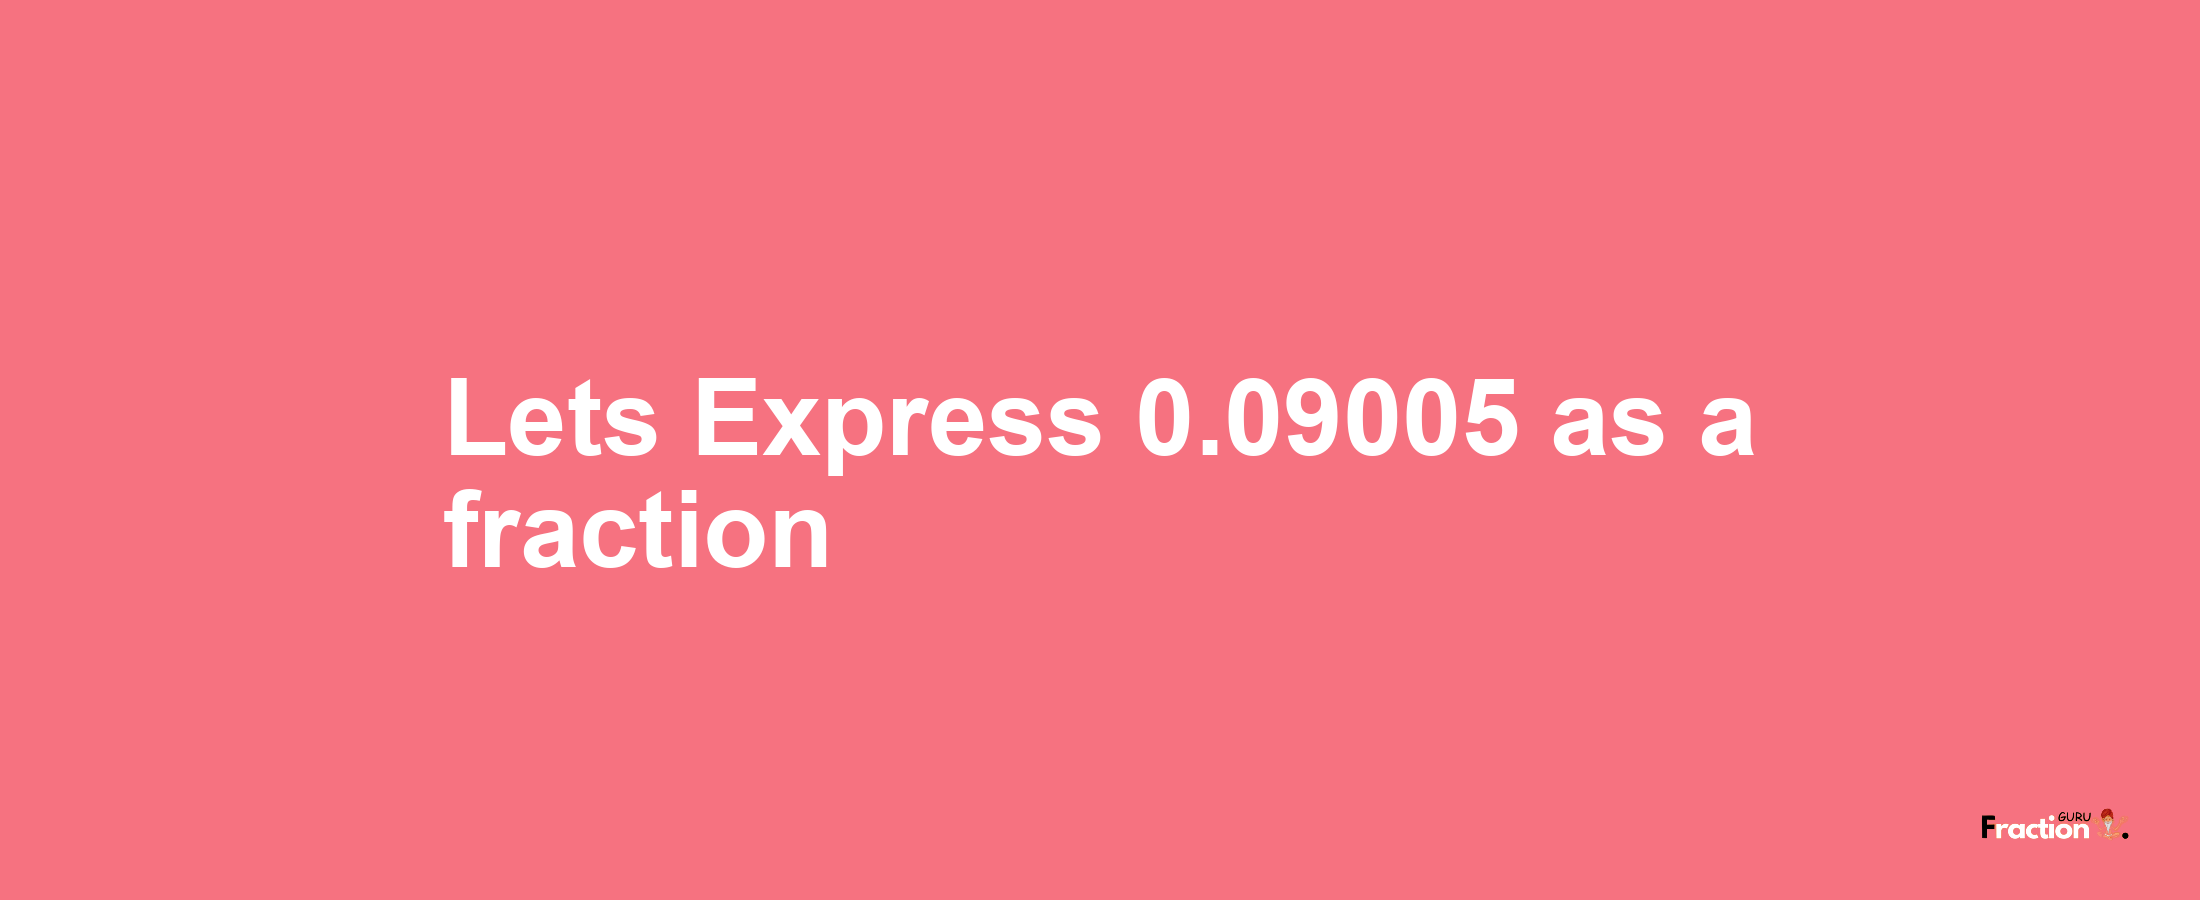 Lets Express 0.09005 as afraction